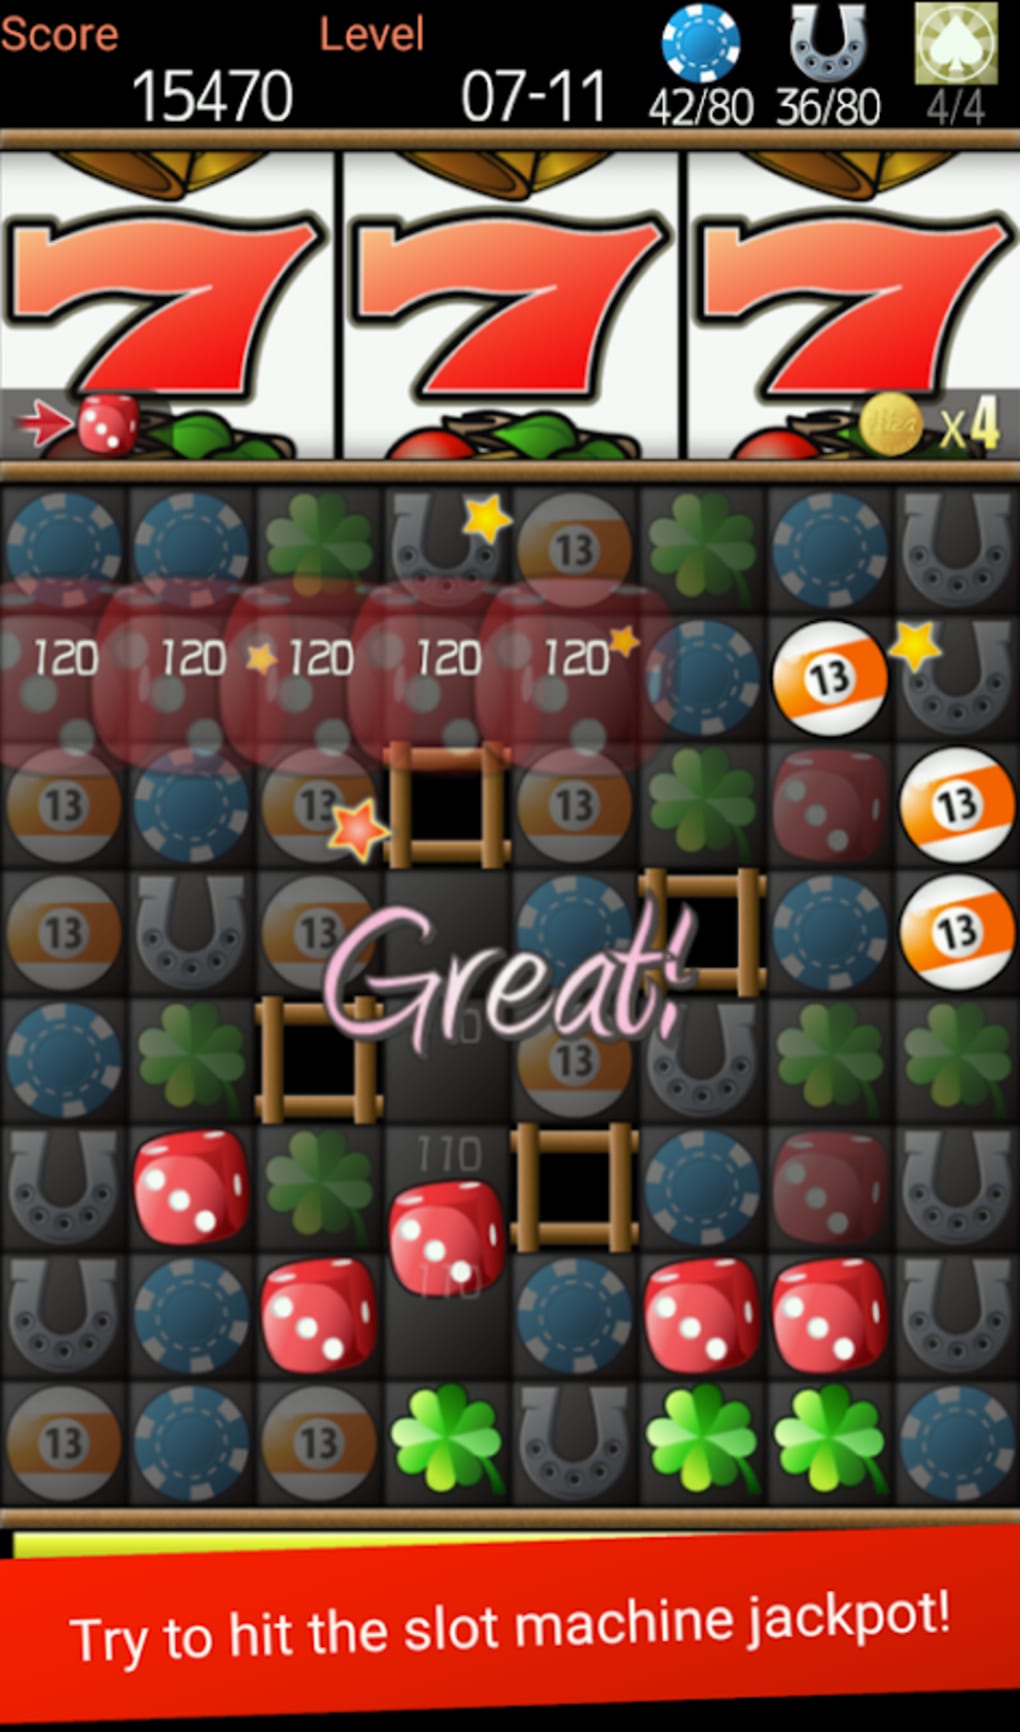 Doodle Jump extension 3.2.3 download free chrome